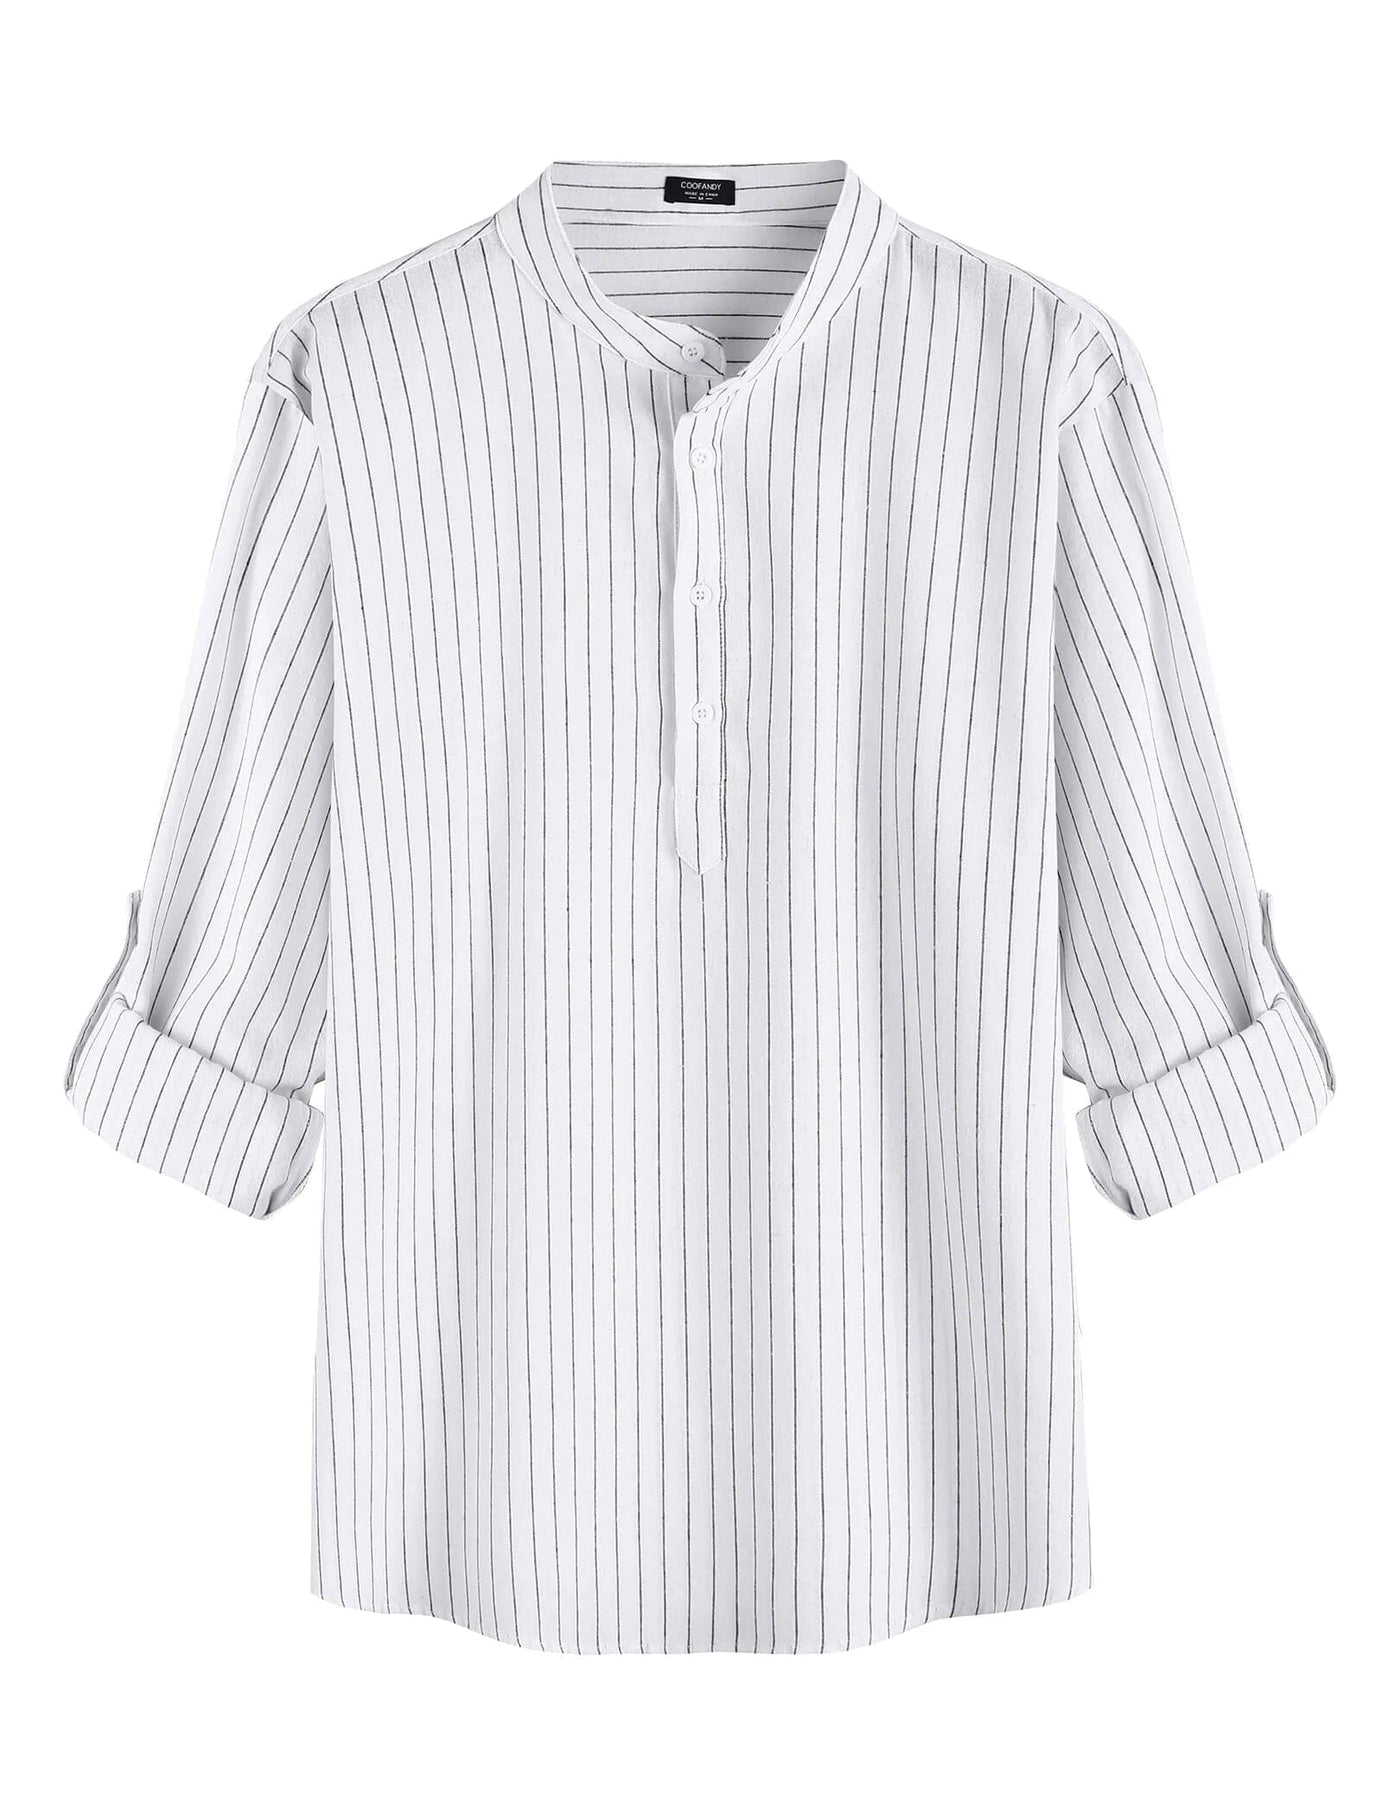 Coofandy Casual Beach Shirts (US Only) Shirts coofandy 